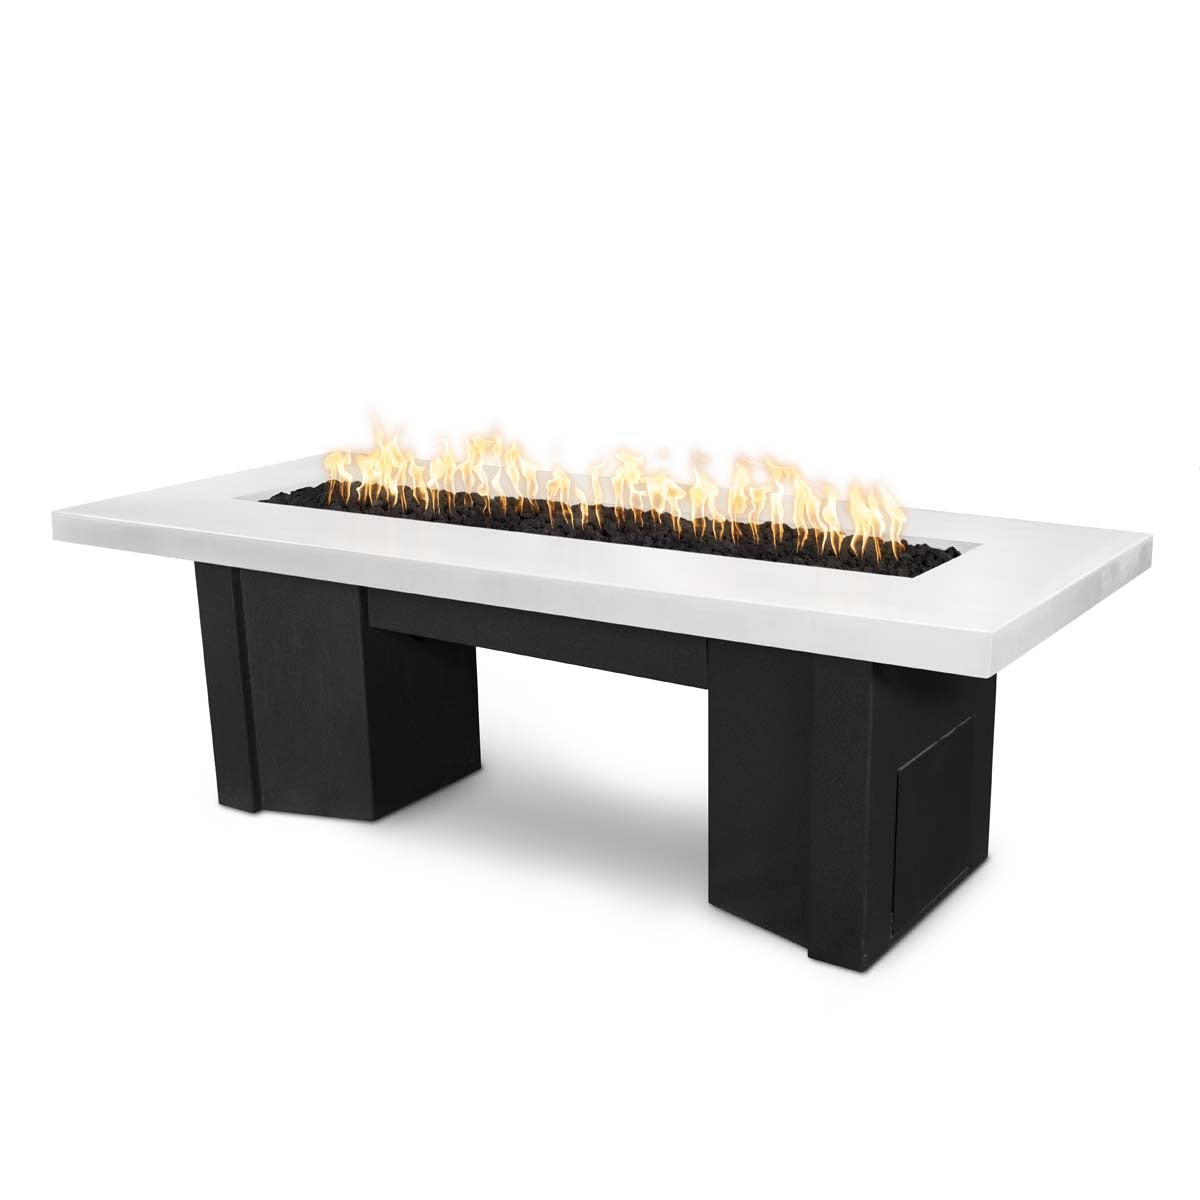 The Outdoor Plus Rectangular Alameda 78" Black & White Powder Coated Liquid Propane Fire Pit with Match Lit Ignition